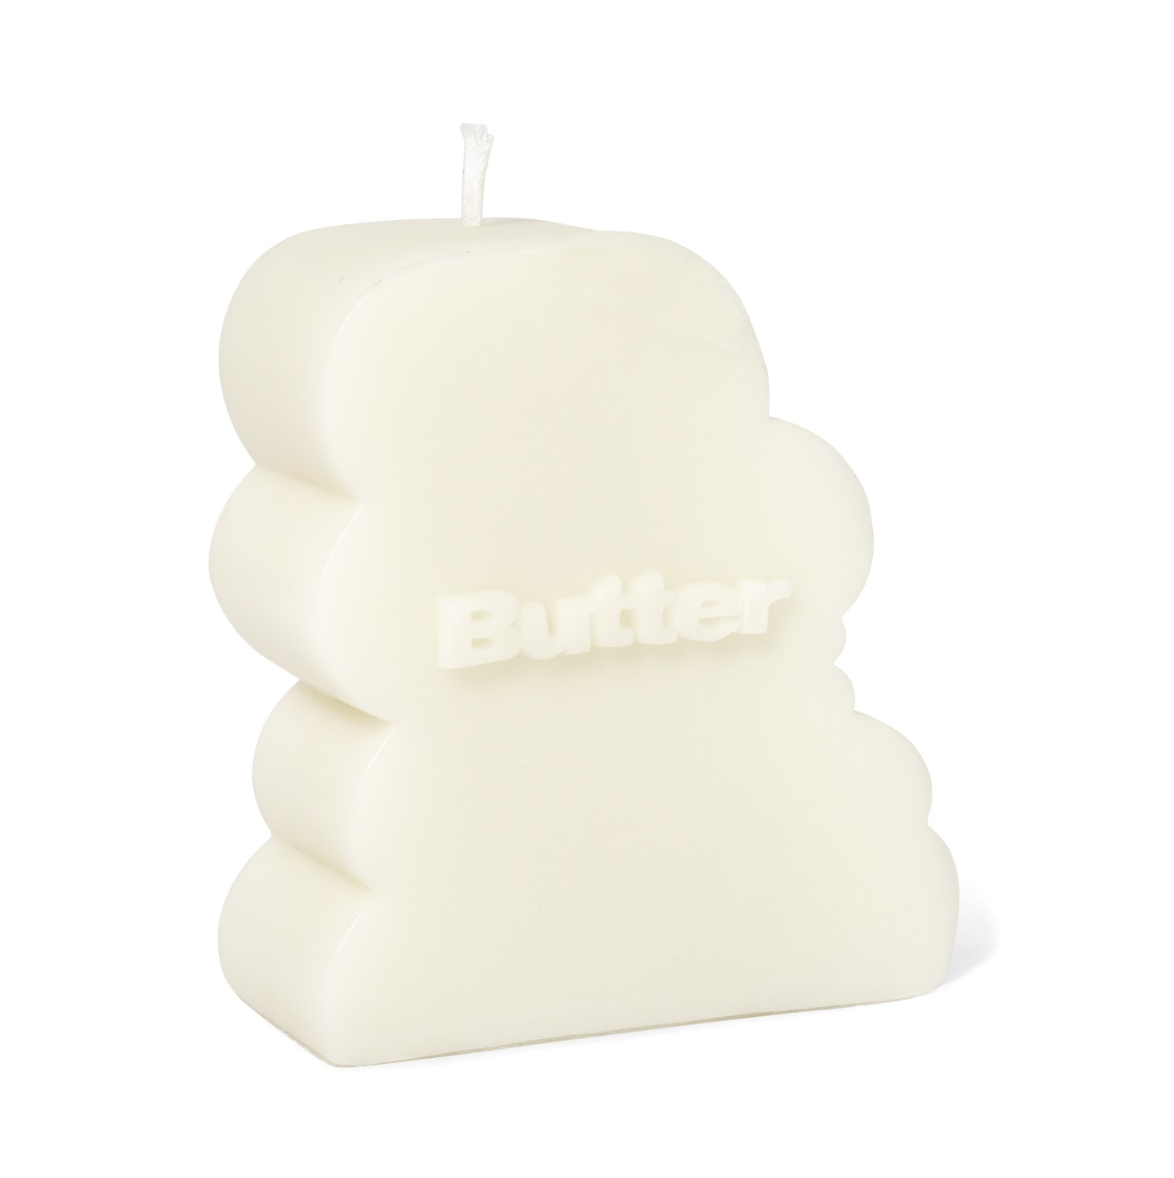 Butter Goods - Rodent Candle - White